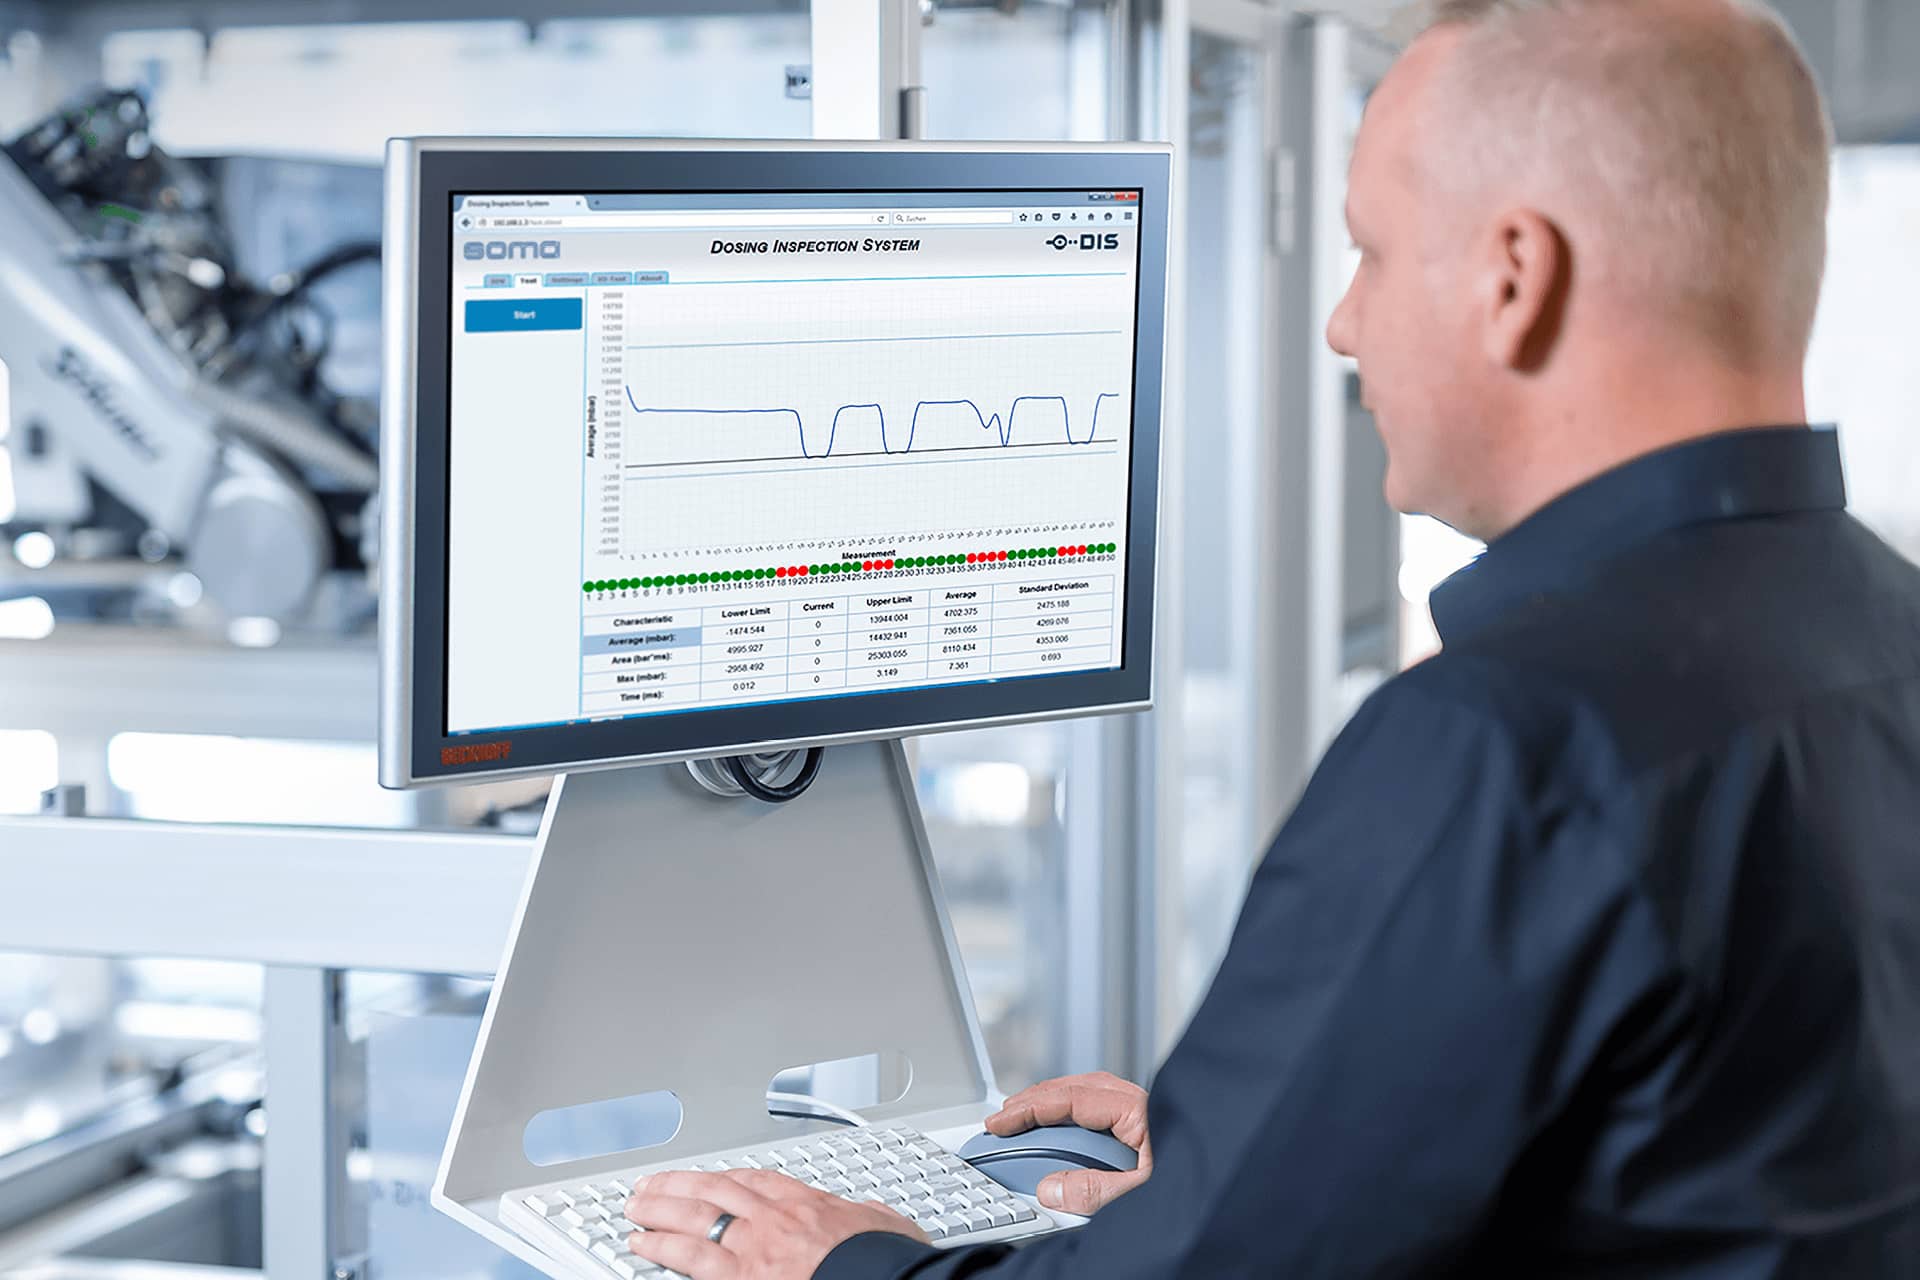 Monitor and document dosing processes reliably with the SOMA dosing inspection system